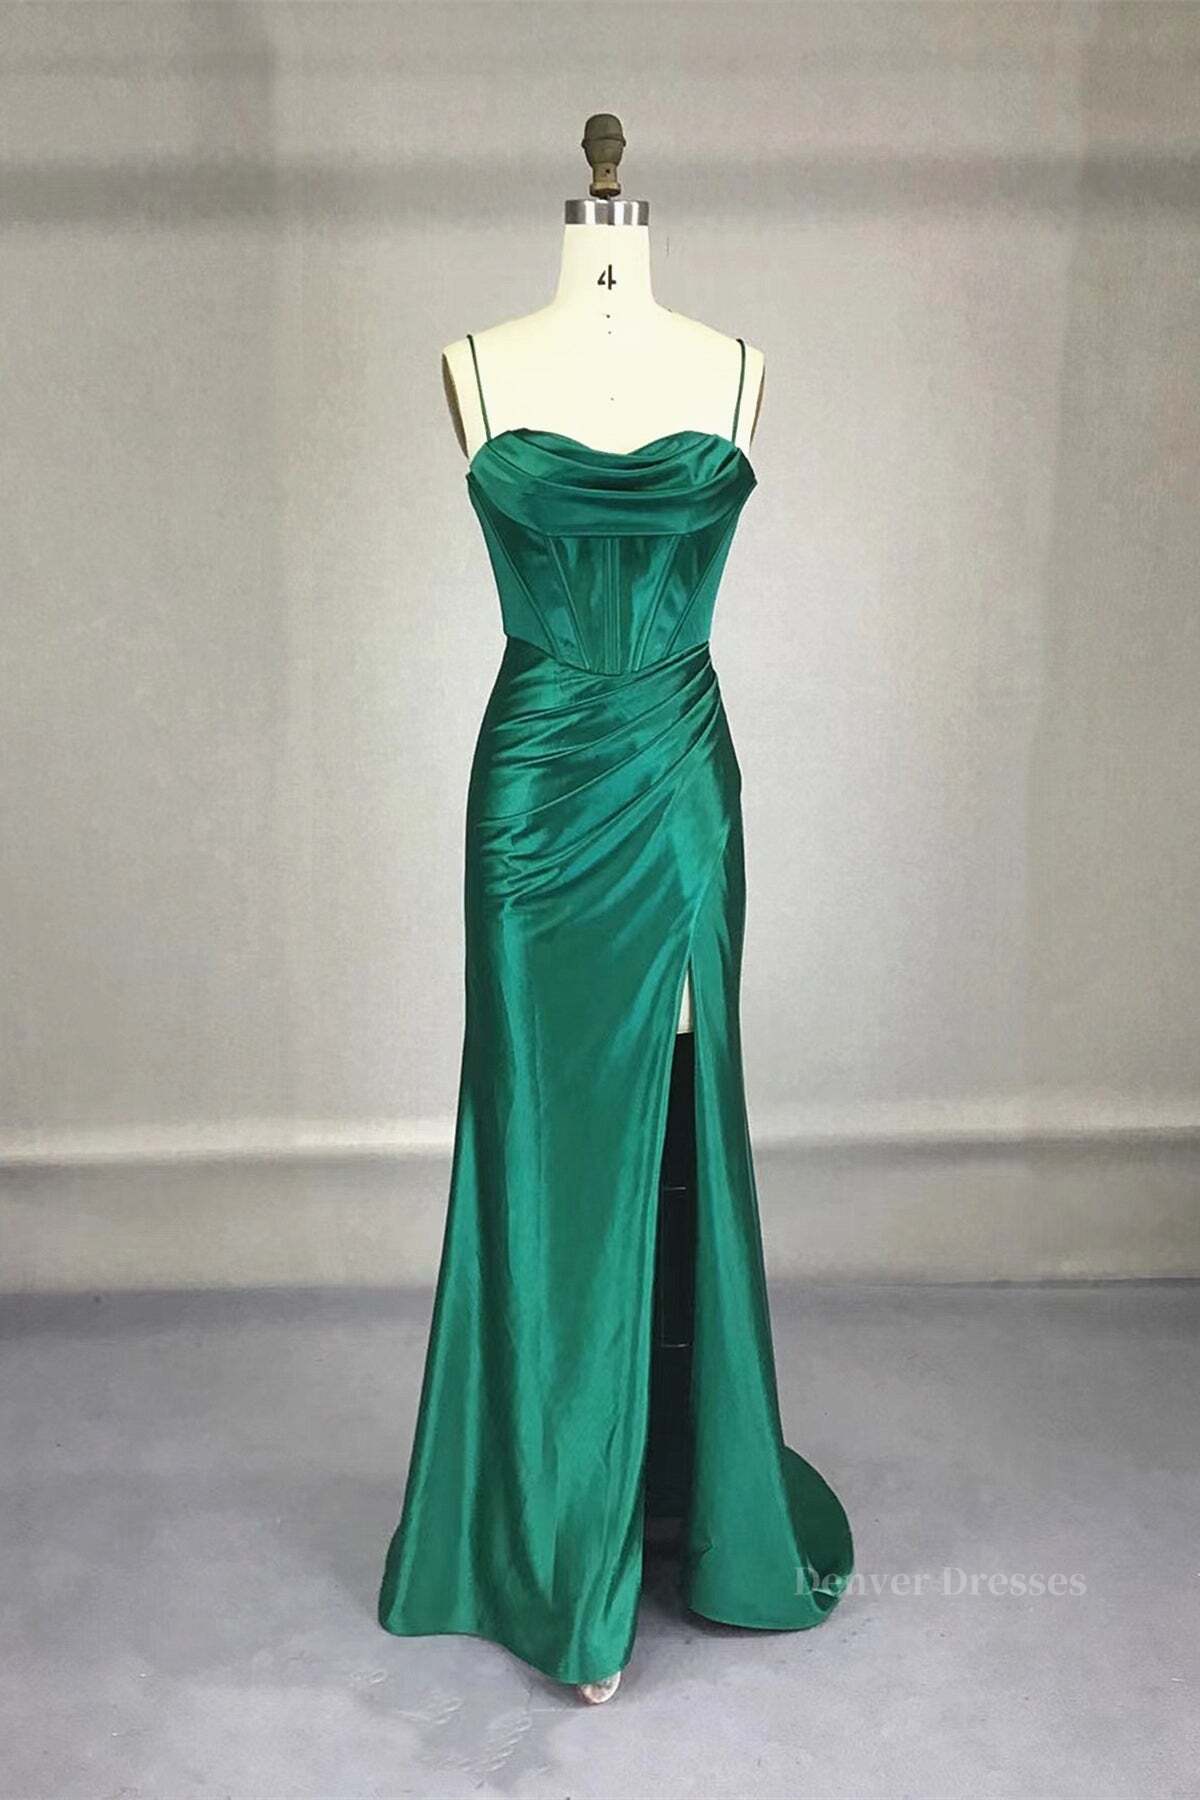 Party Dress With Sleeves, Strapless Dark Green Prom Dresses, Dark Green Formal Evening Dresses